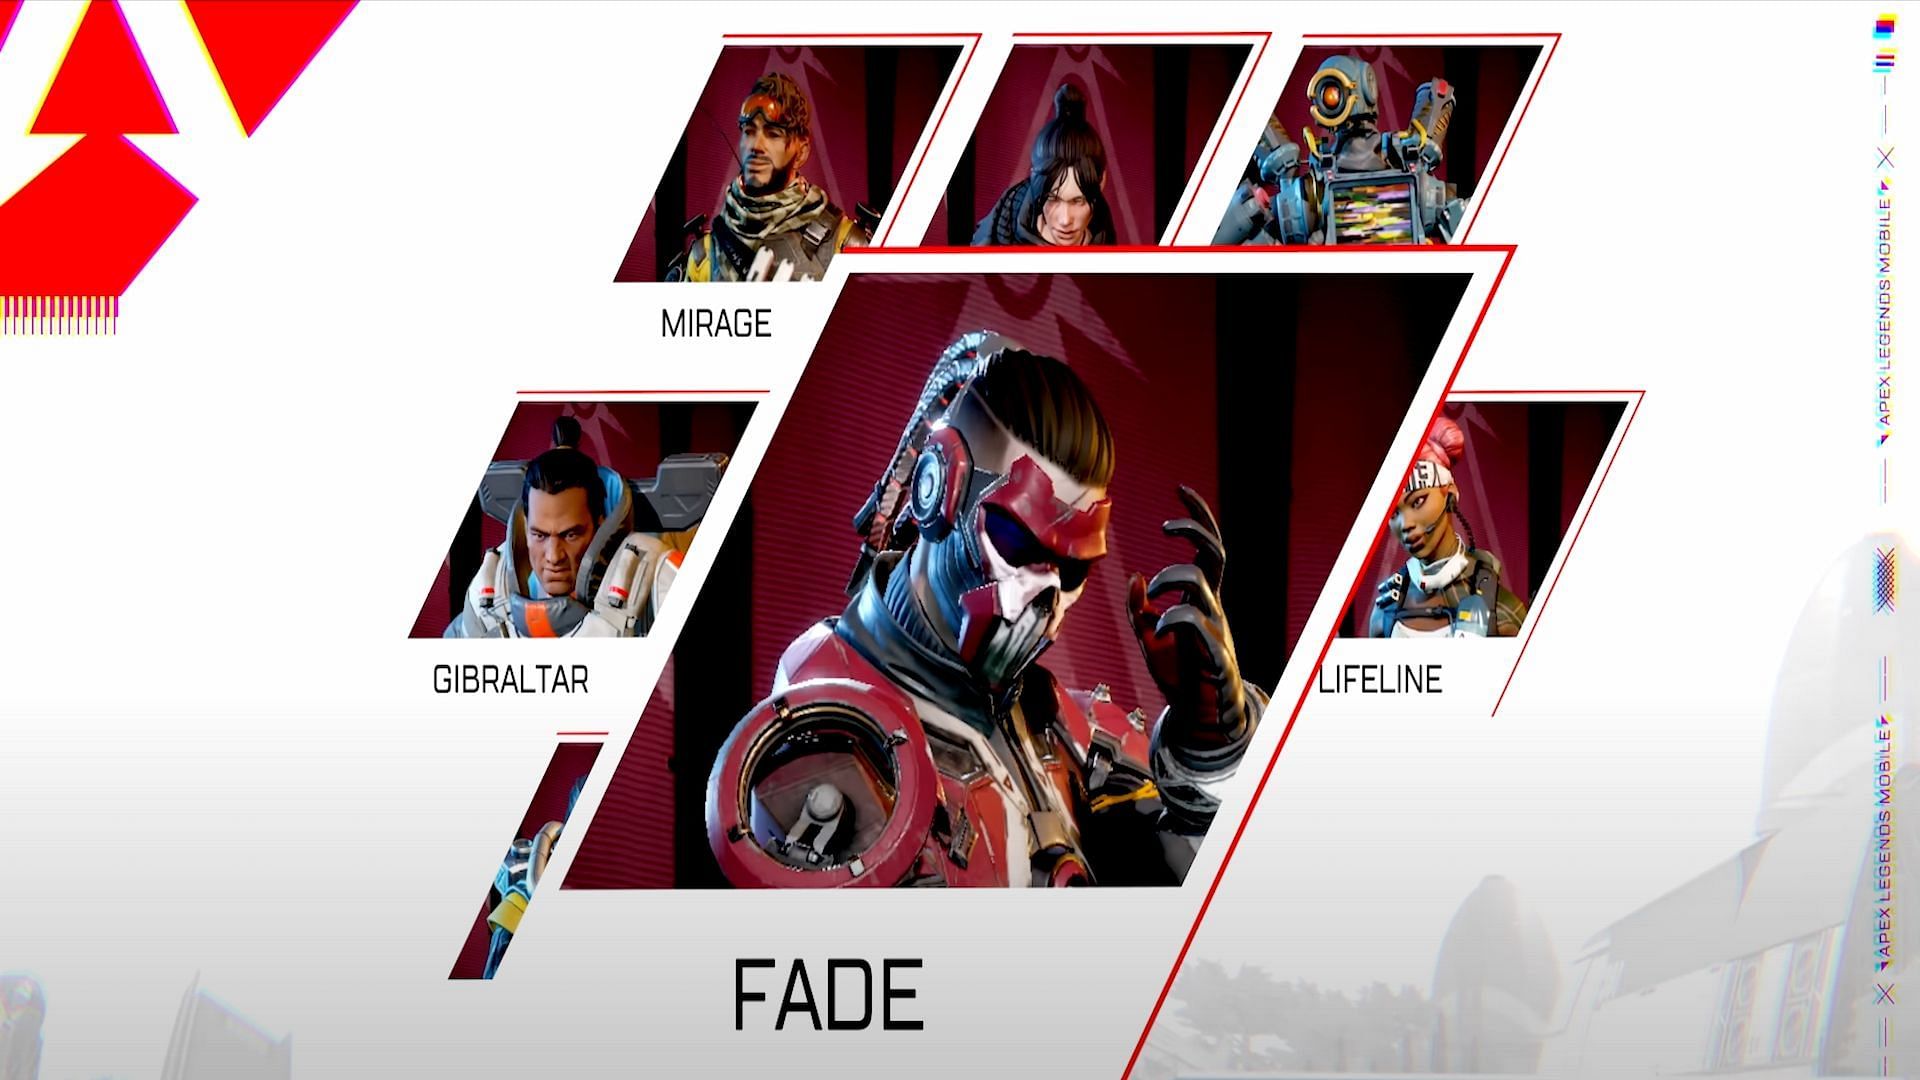 Fade is a very powerful choice in Apex Legends Mobile (Image via Respawn Entertainment)